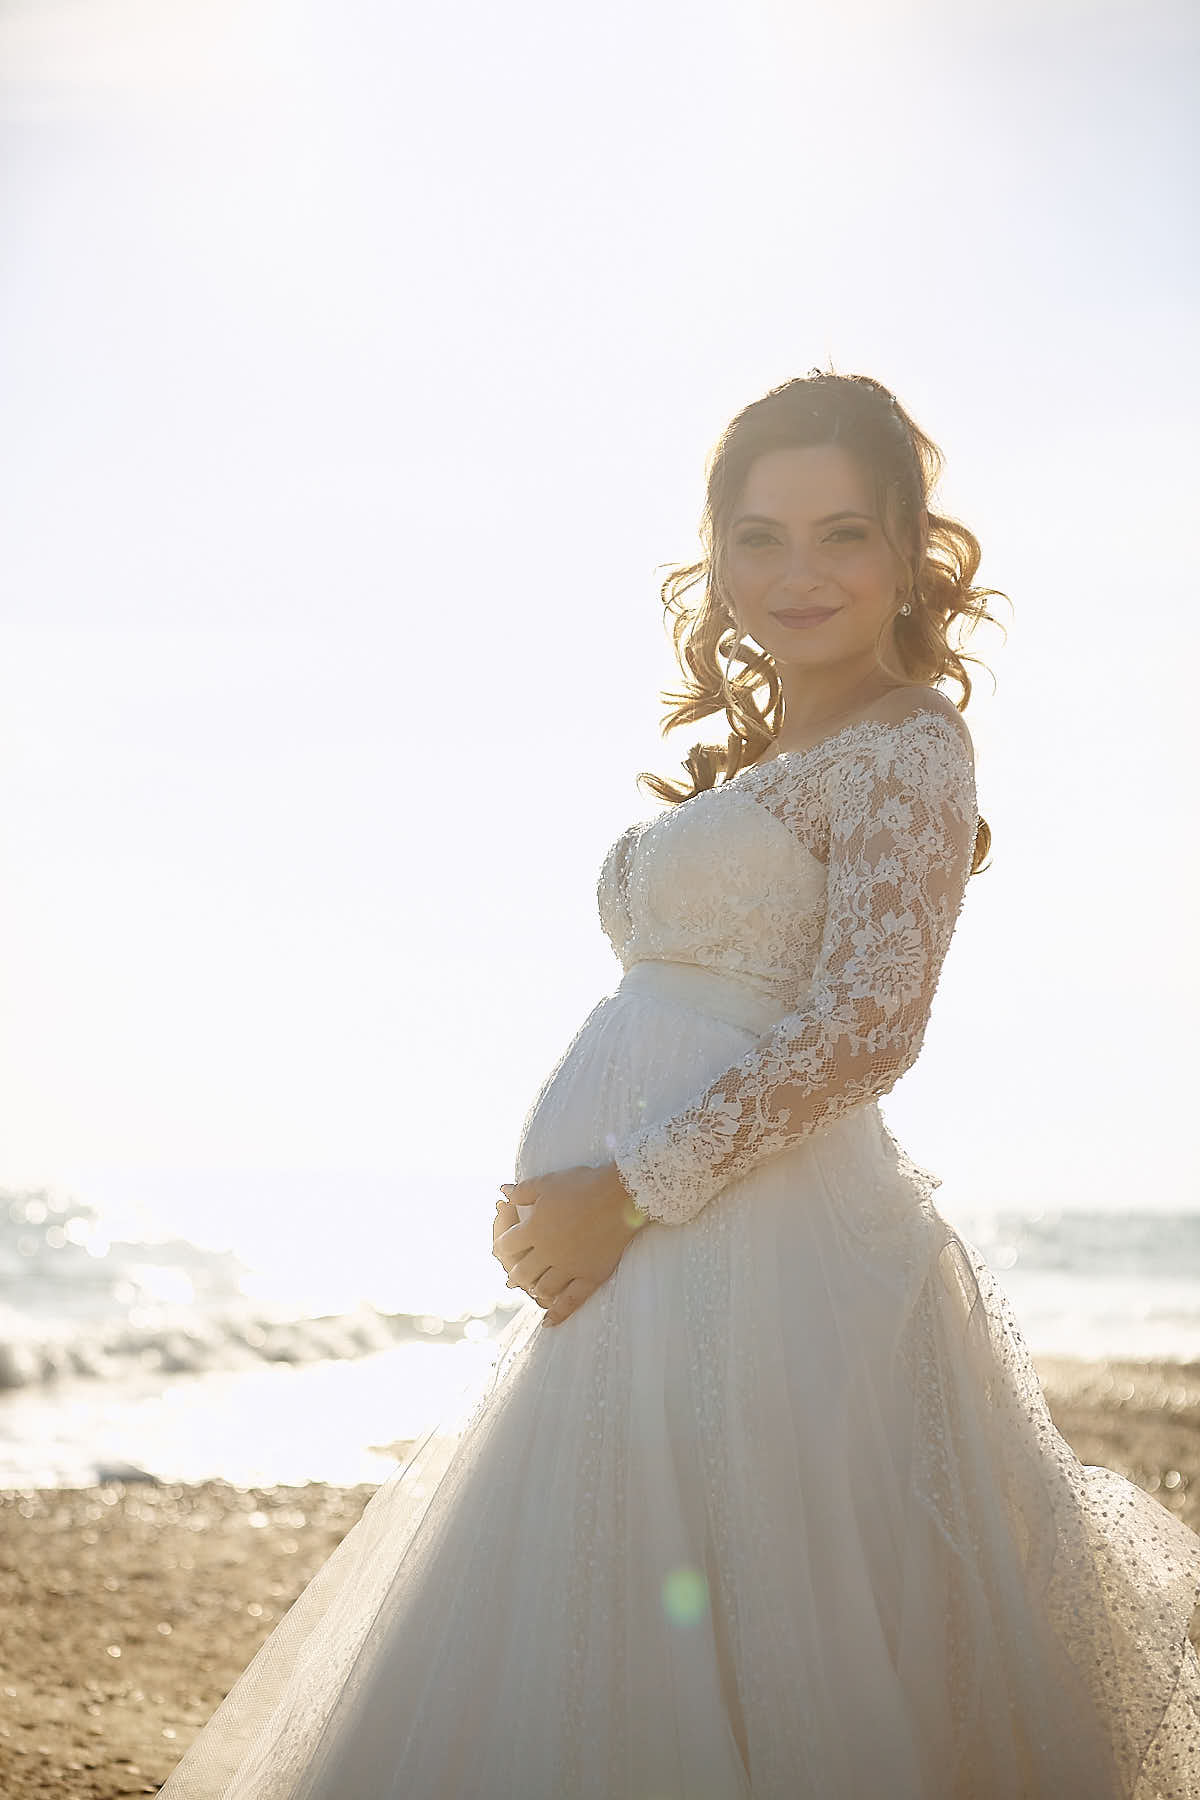 Bride holding her growing belly while looking at the camera with a pure smile